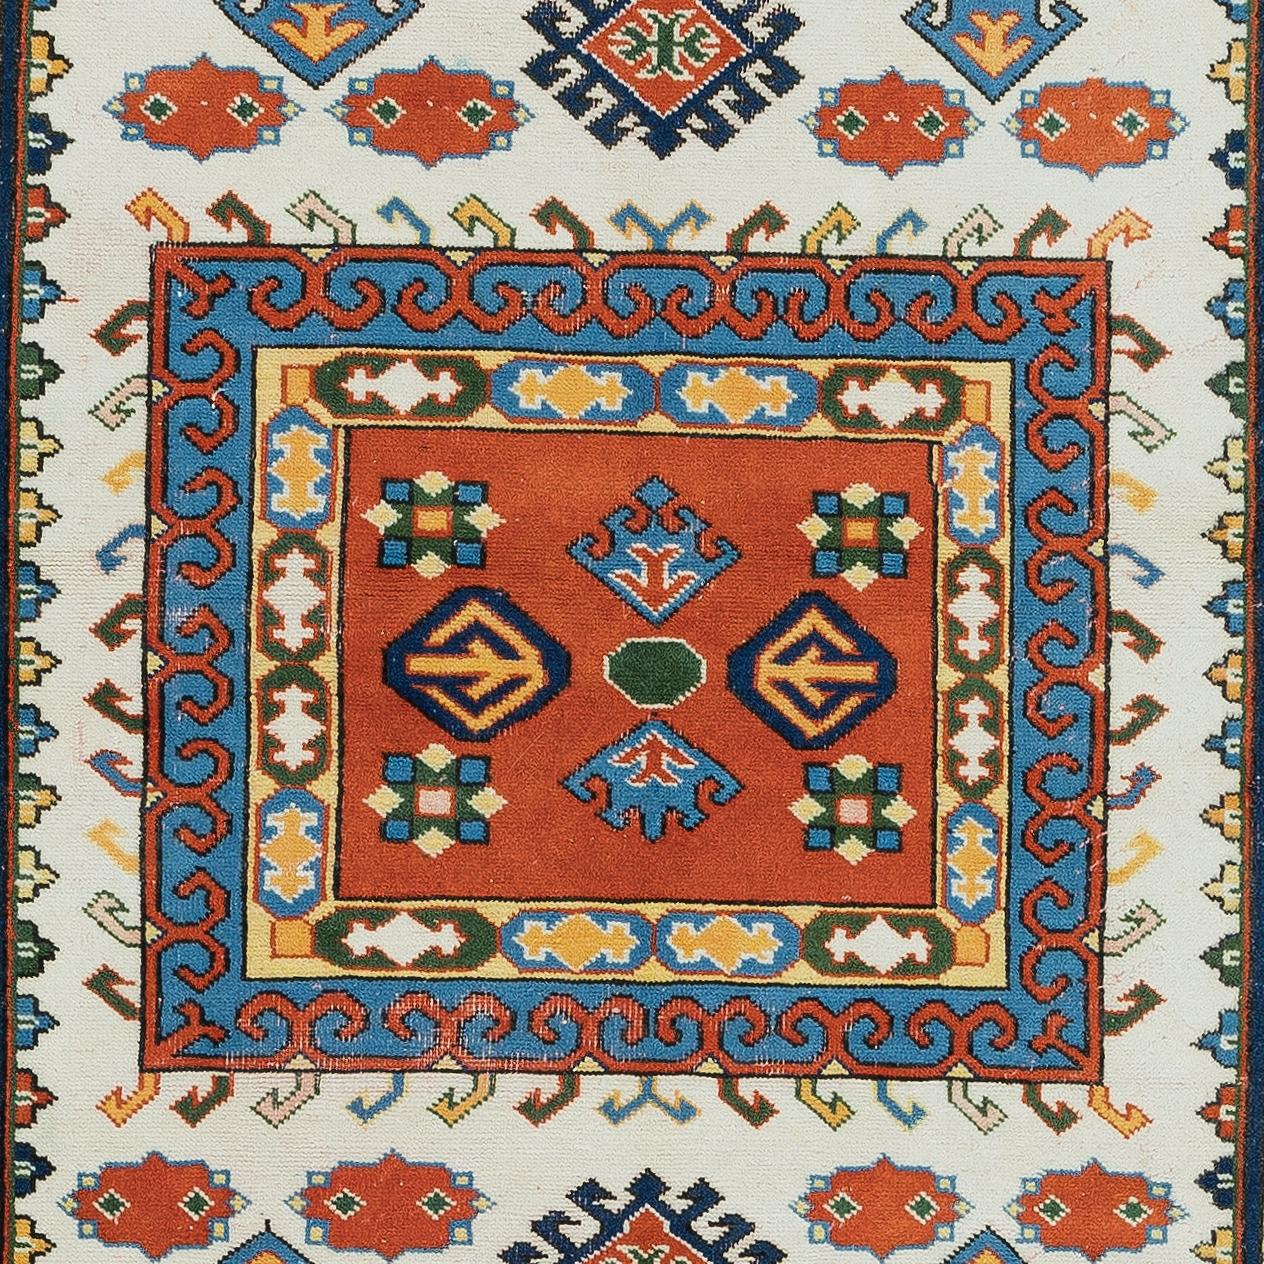 Hand-Knotted 4x5.6 Ft Colorful Accent Rug, Modern Turkish Carpet, Handmade Floor Covering For Sale